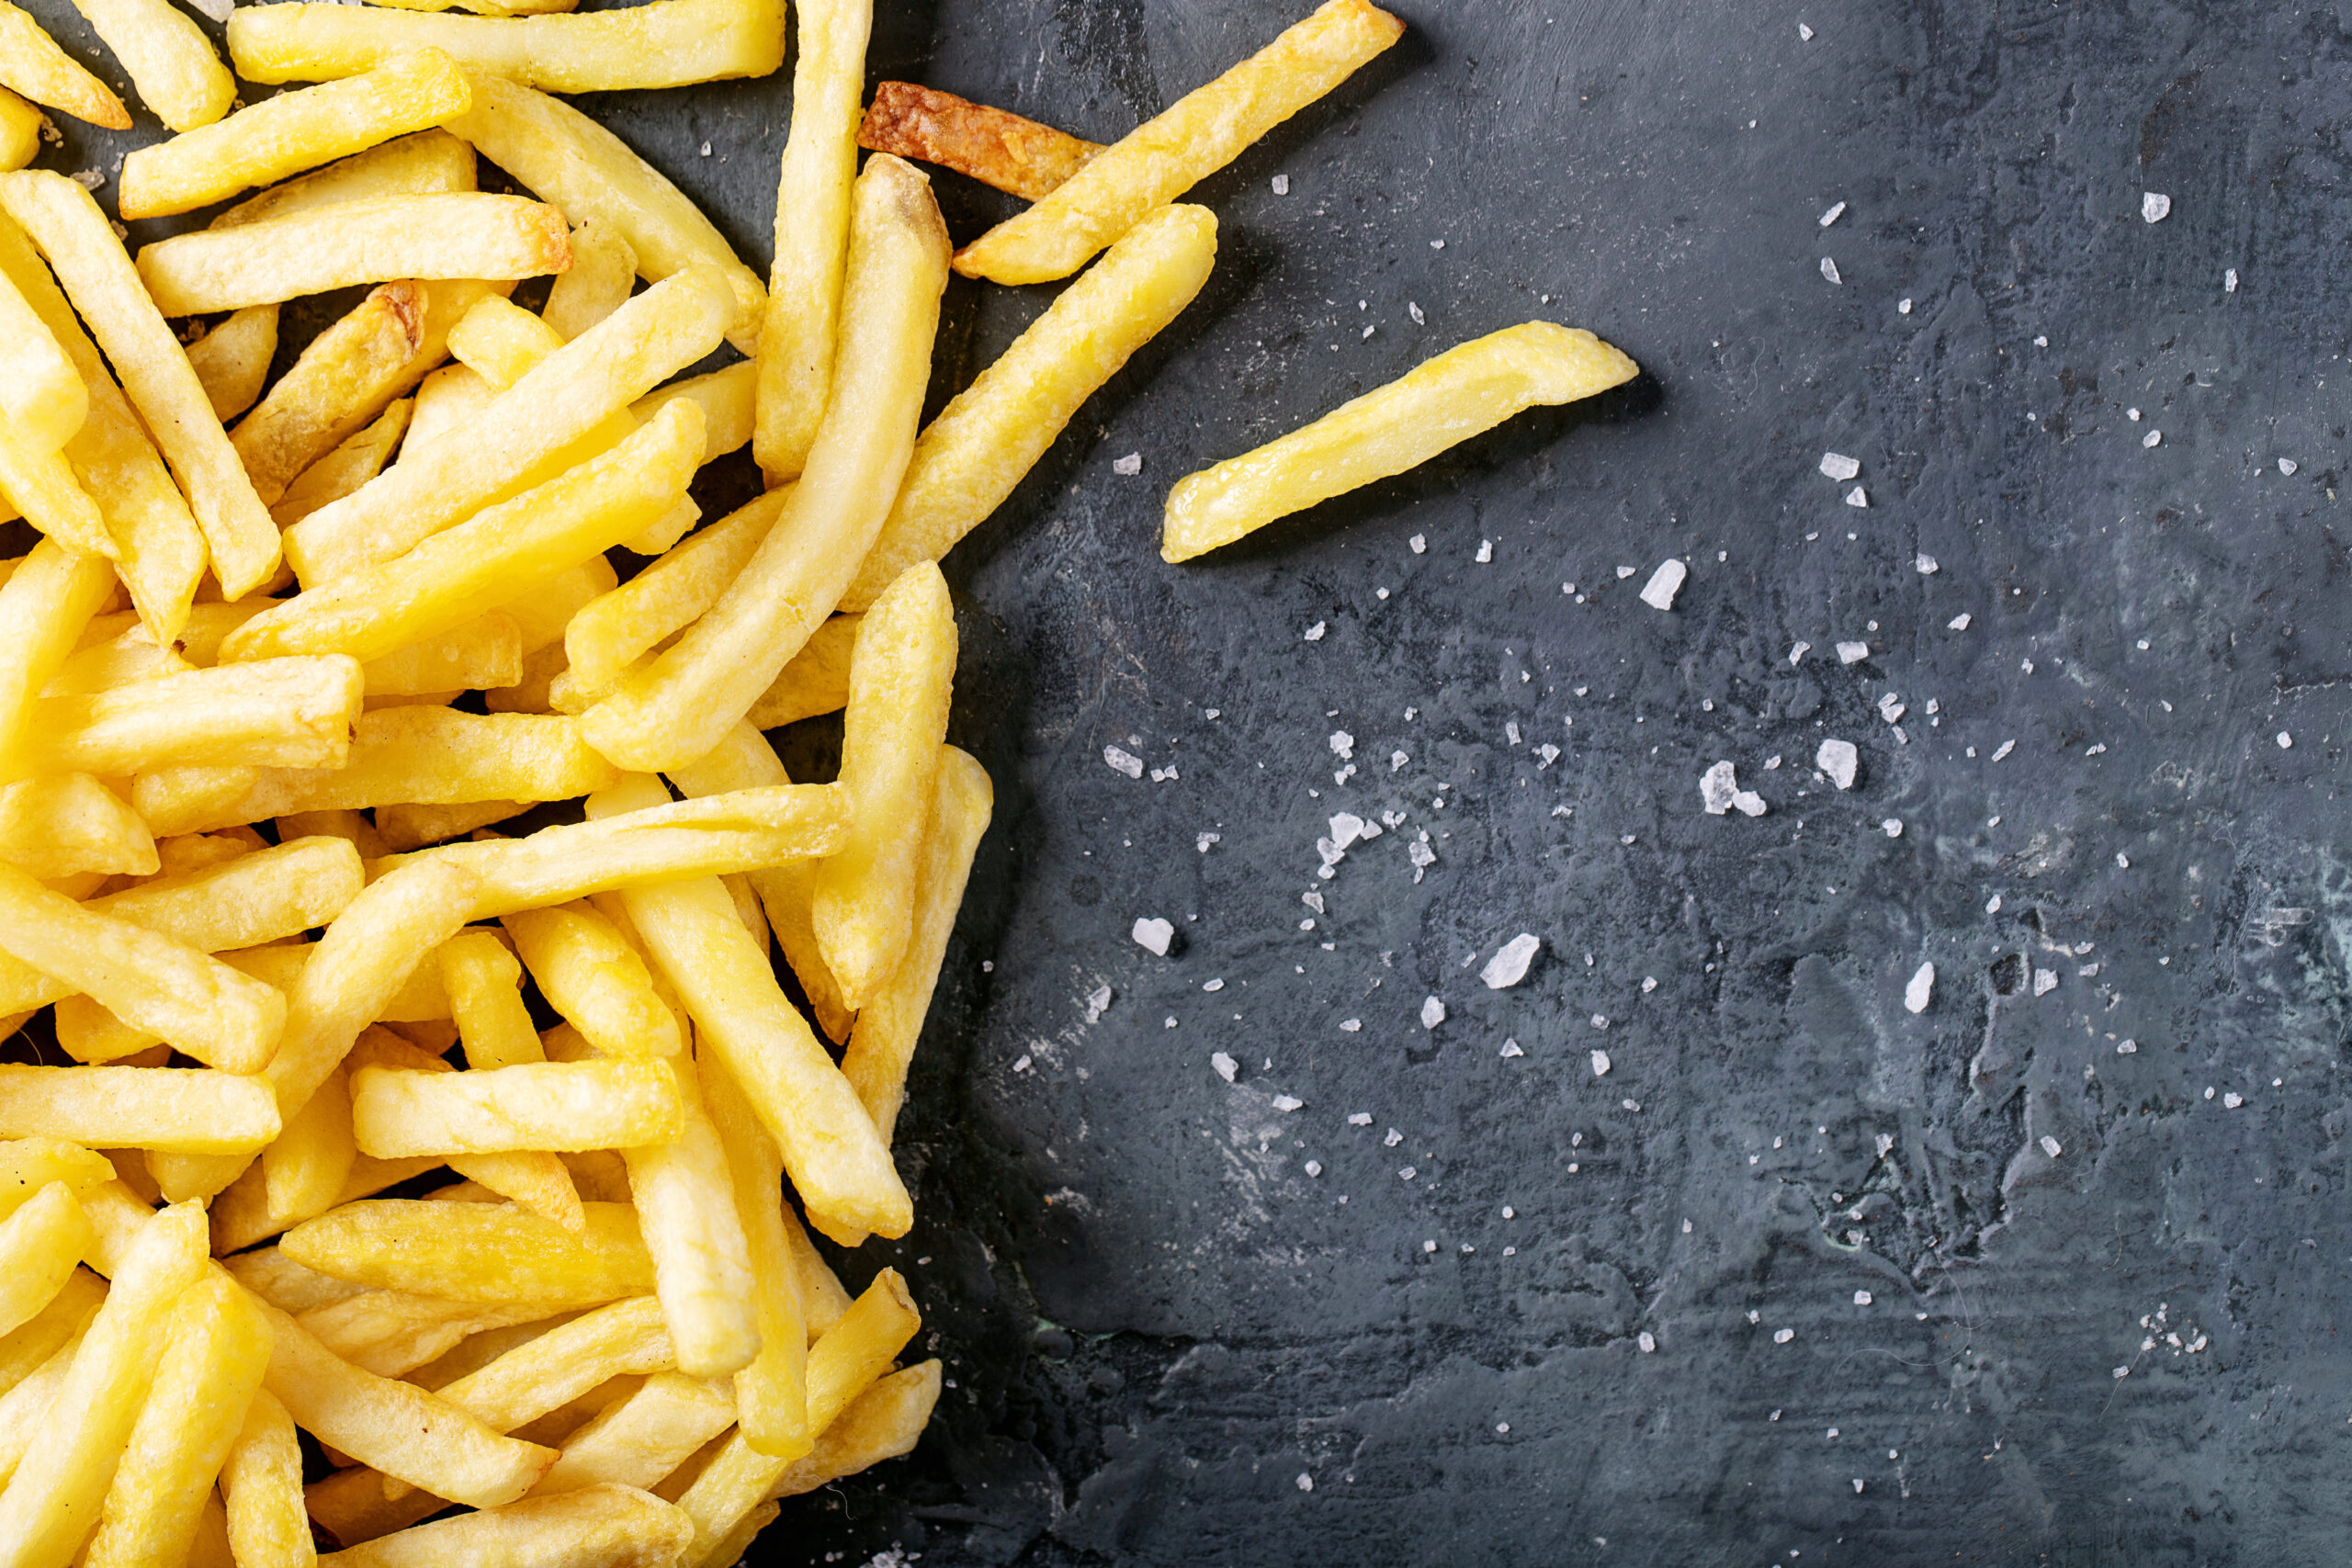 Celebrate French Fries Day, today, August 20